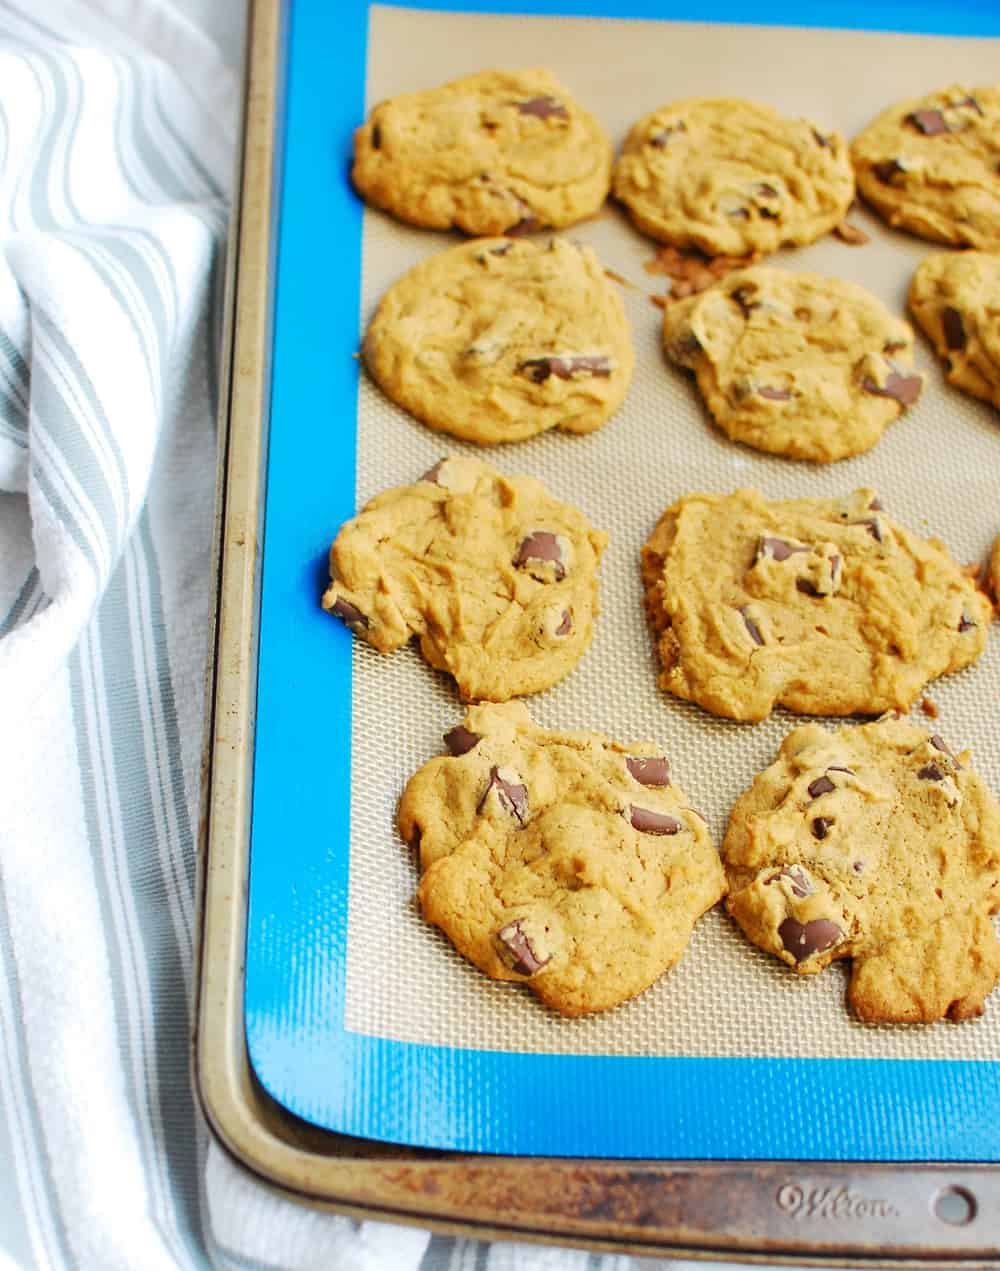 A baking sheet full of just baked cookies